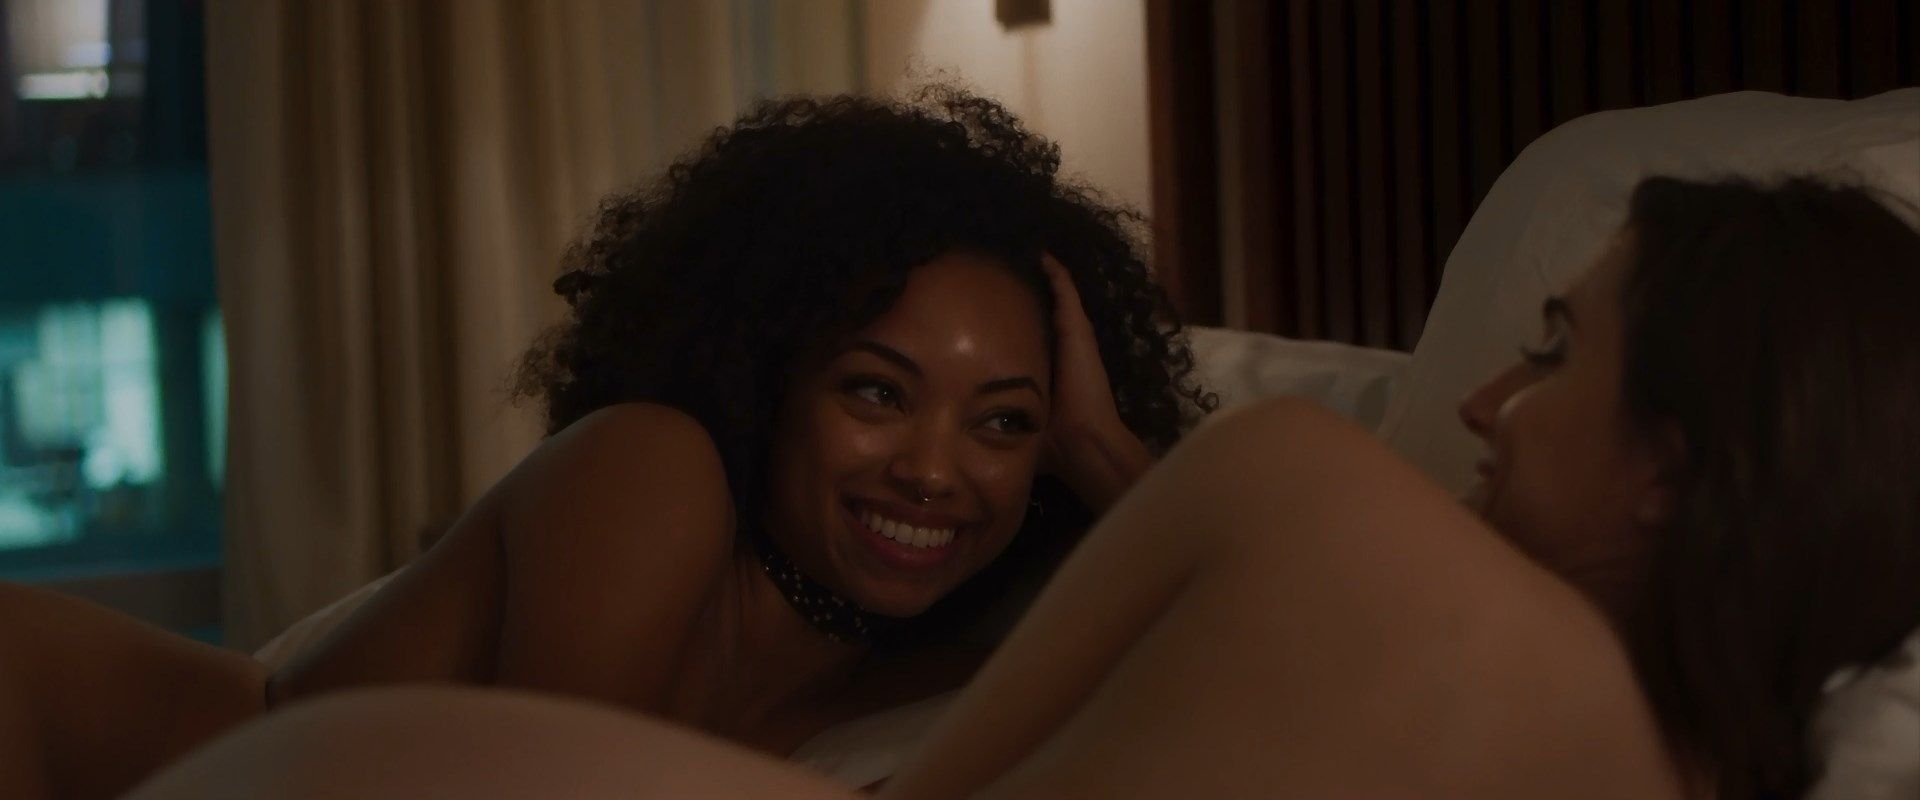 Logan Browning, Allison Williams Nude - The Perfection (12 Pics + GIF & Video)